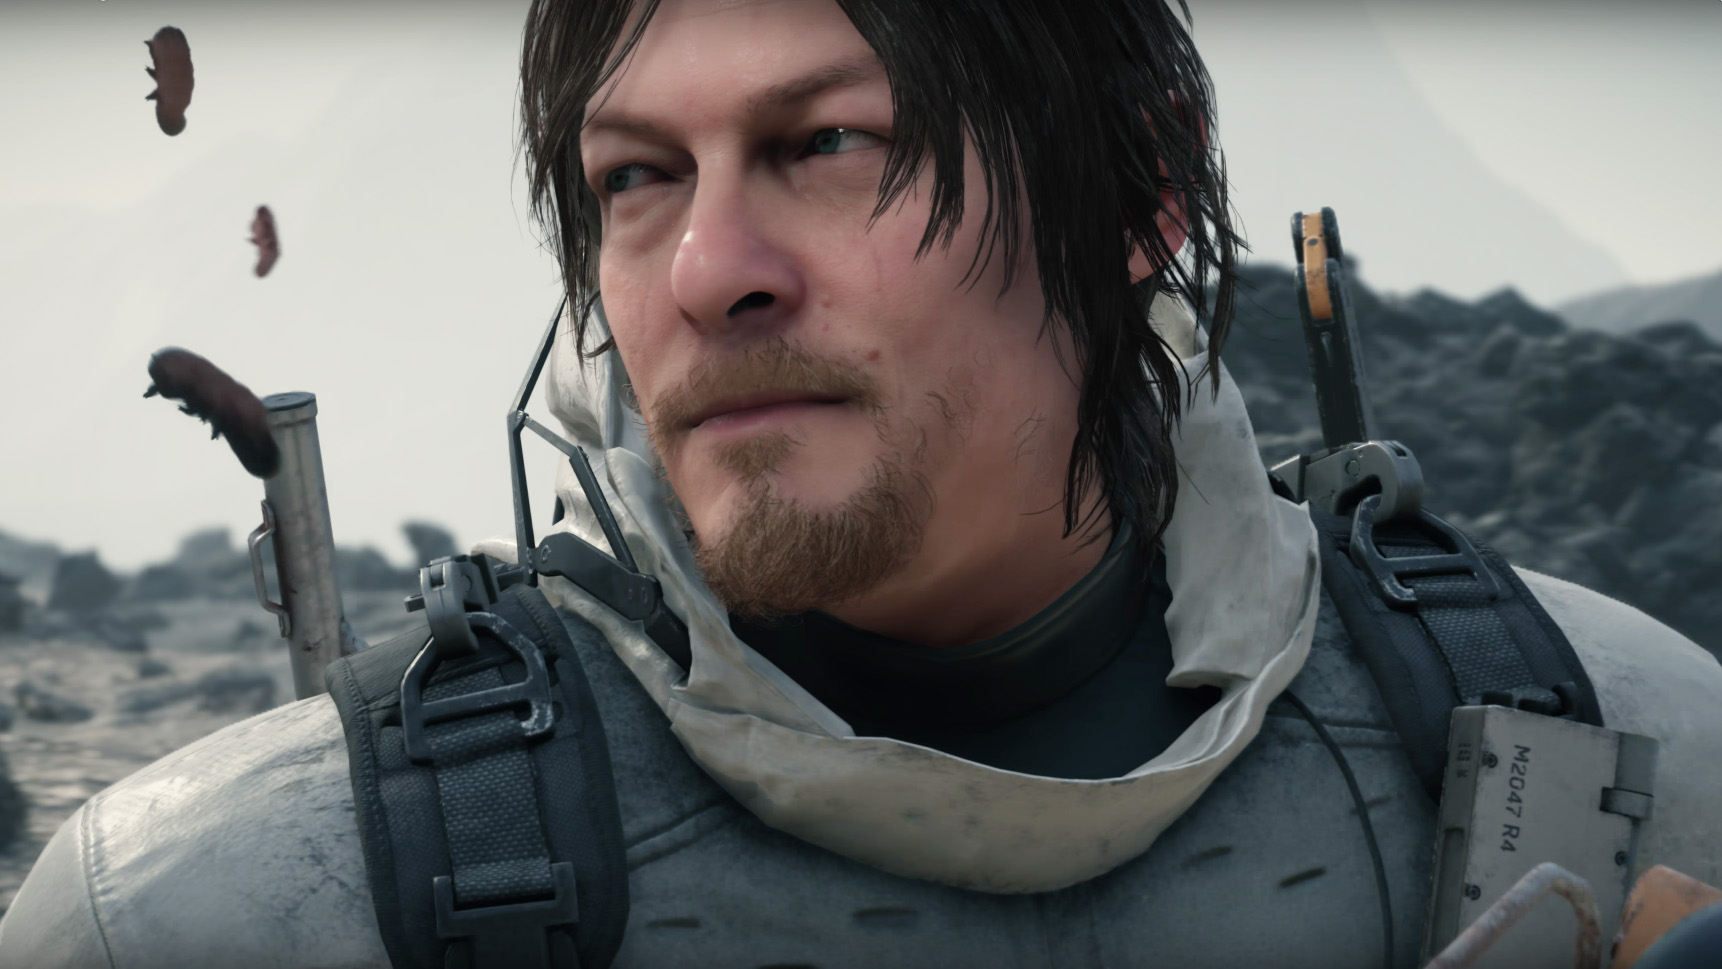 Walking Dead' Star Norman Reedus' Next Project: Video Game 'Death